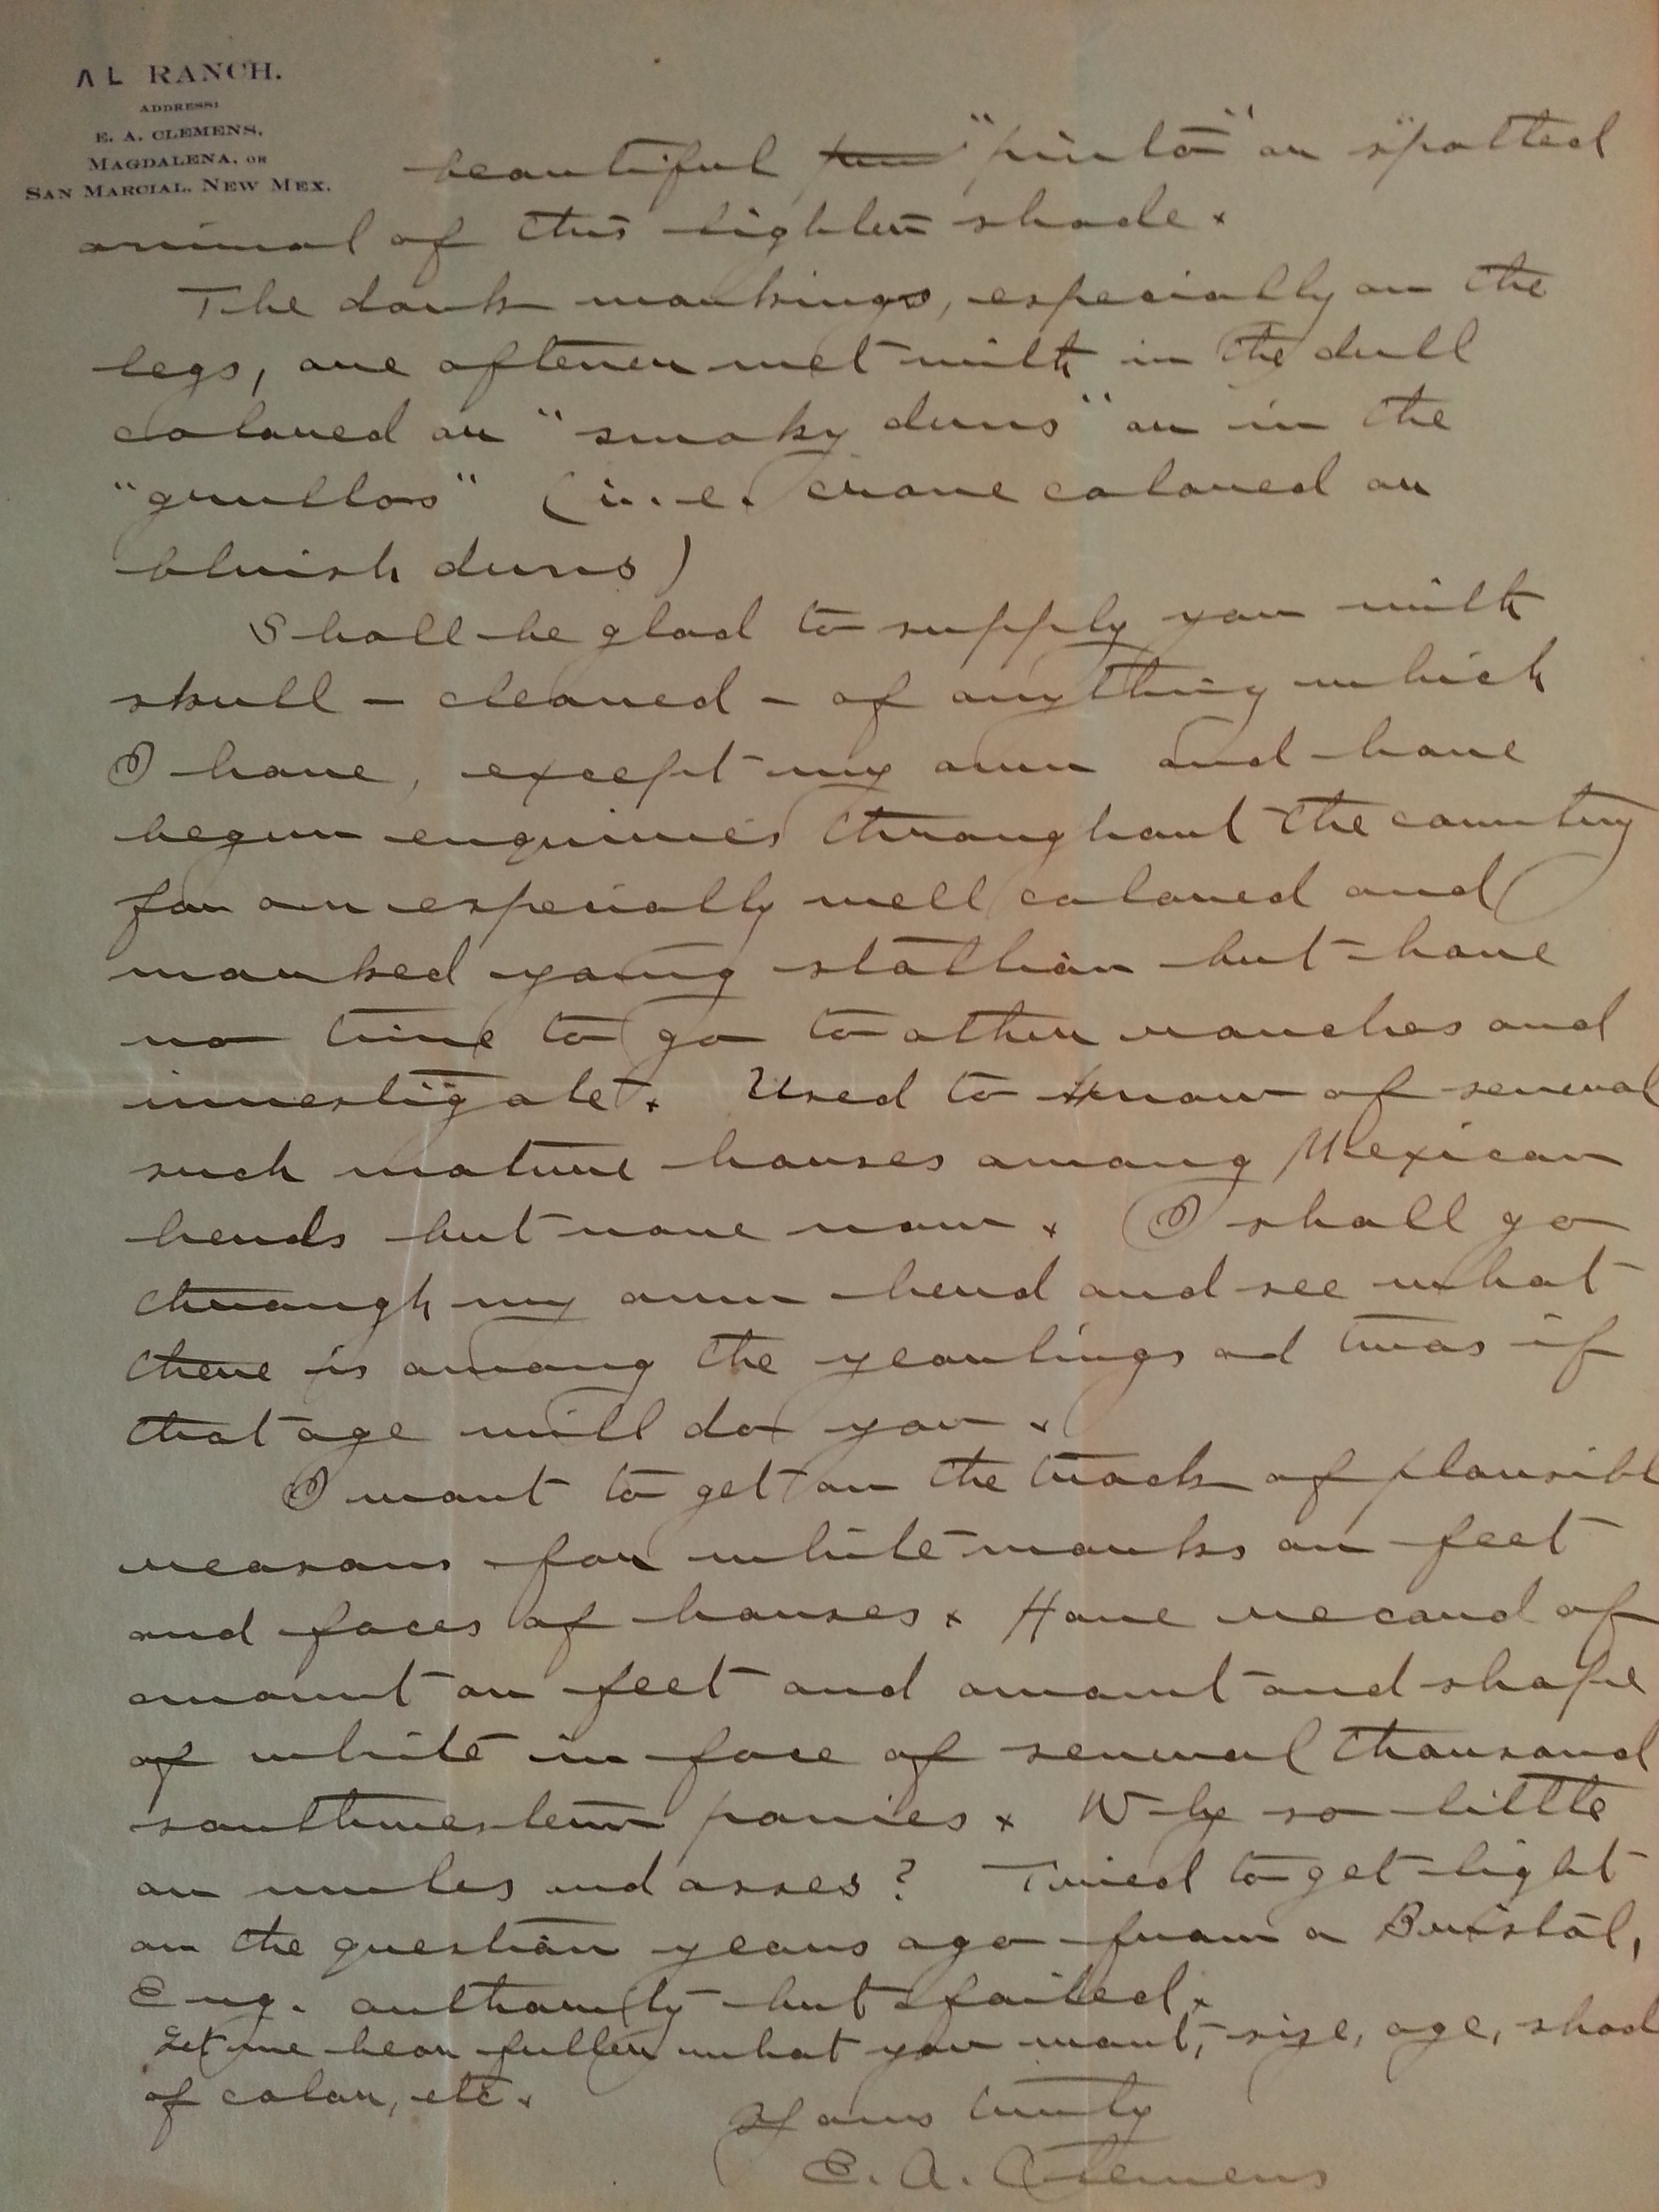 E.A Clemens letter Coll14.9.8.3